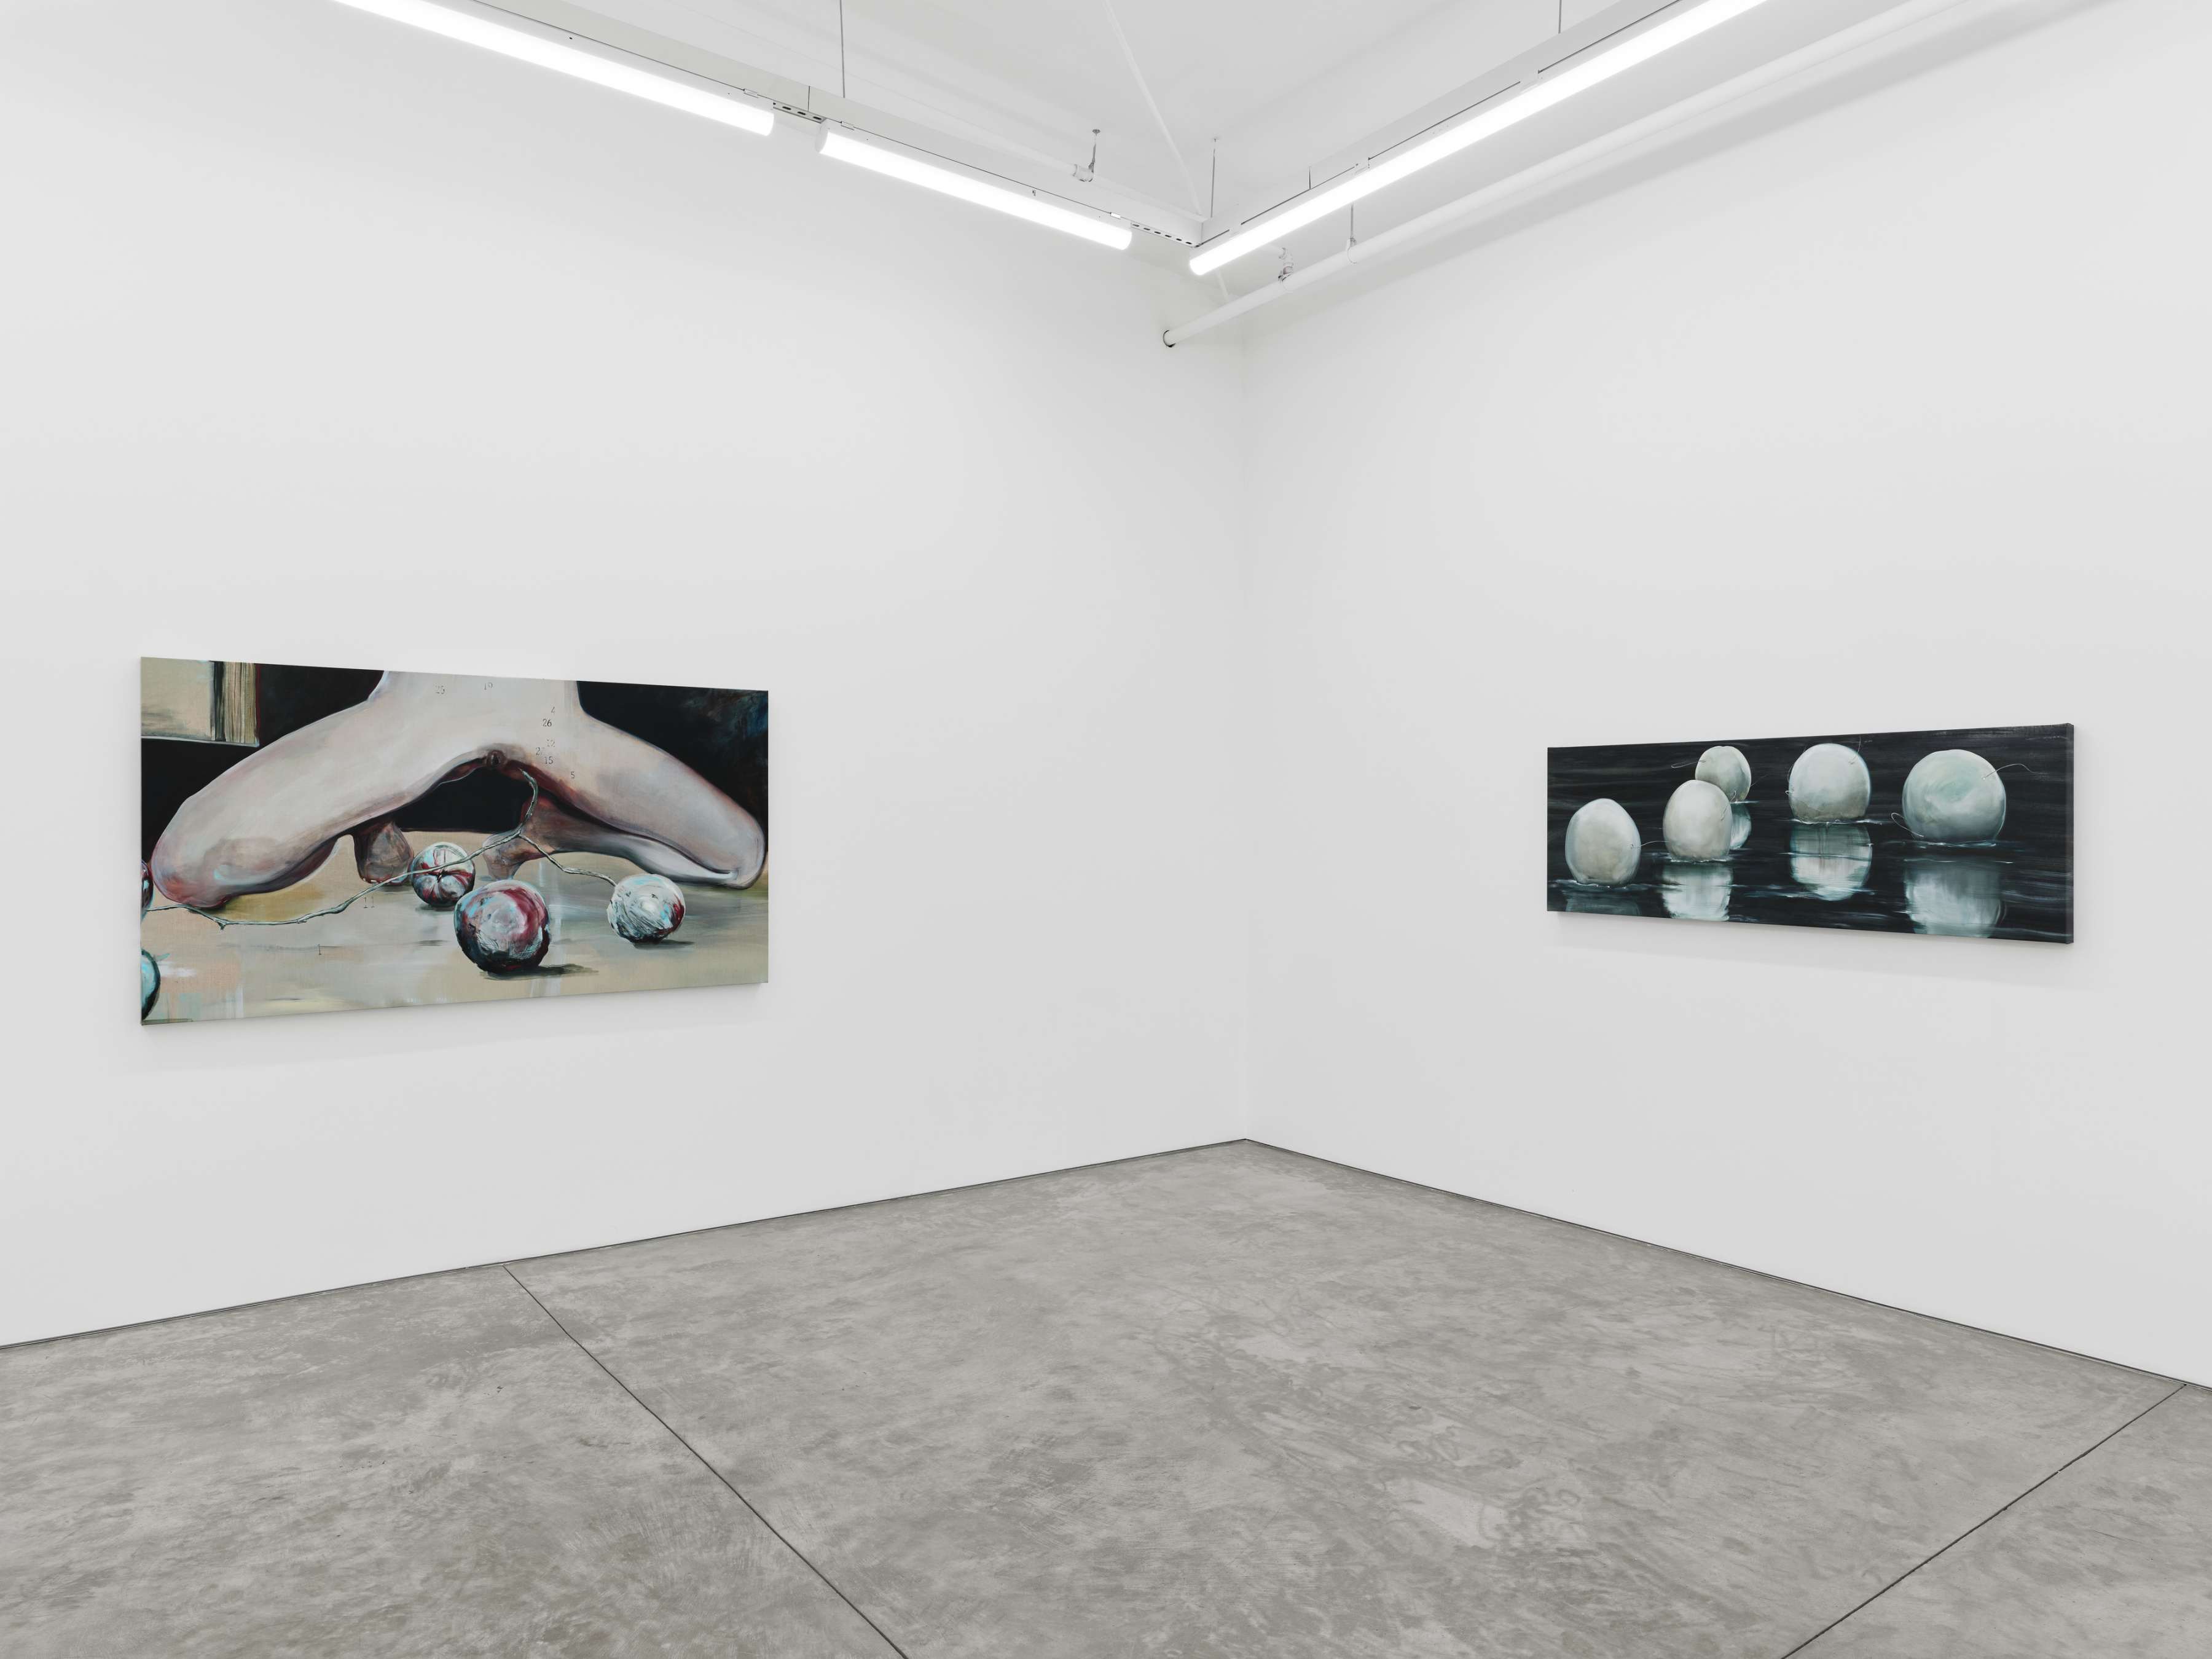 Installation view of Connor Marie Stankard’s exhibition “Love Apple” at Night Gallery